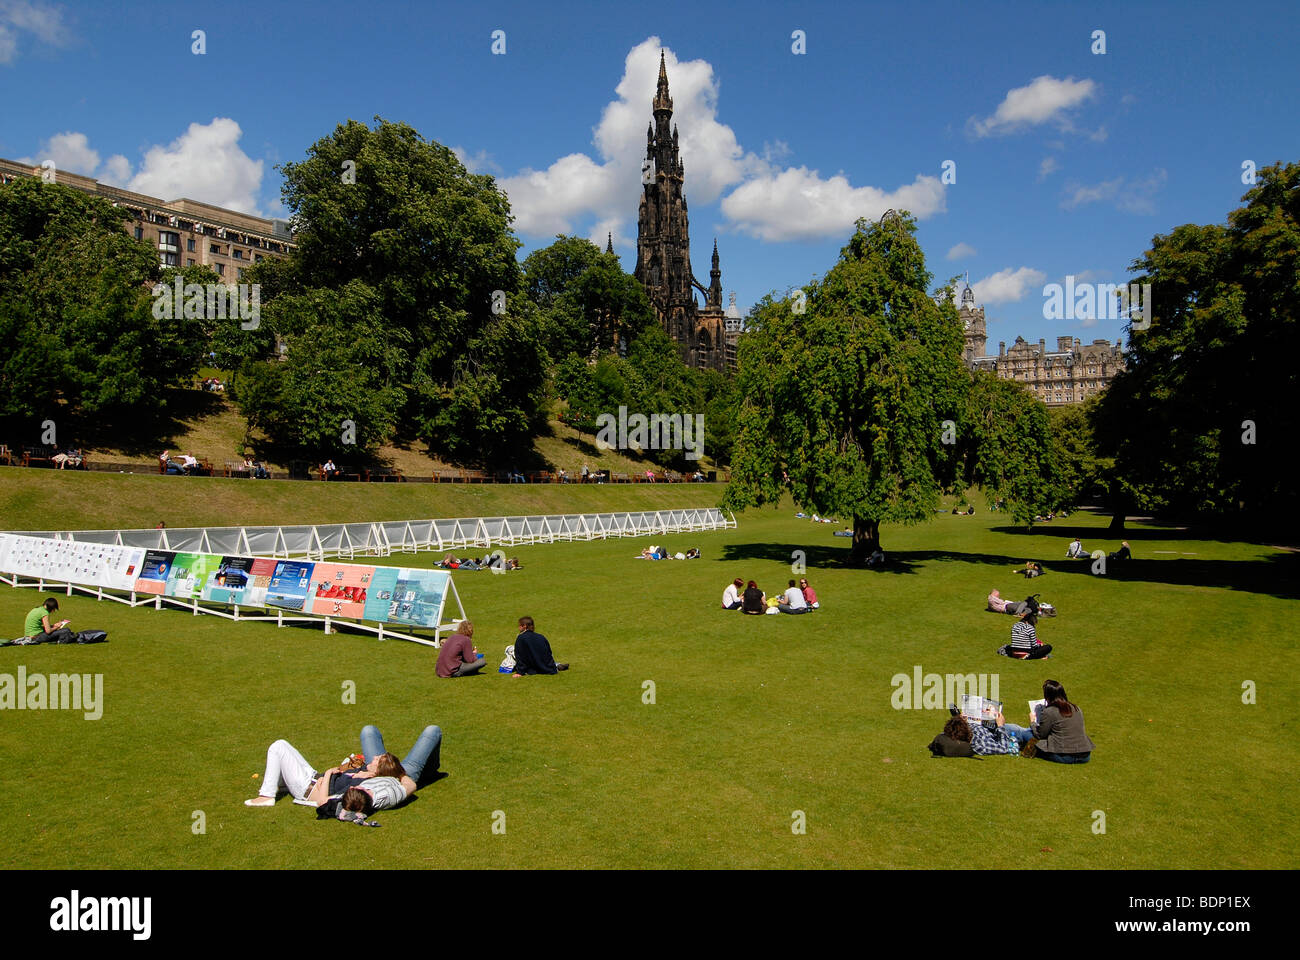 People relaxing in a park, in front of the Scott Monument in Edinburgh, Scotland, UK, Europe Stock Photo